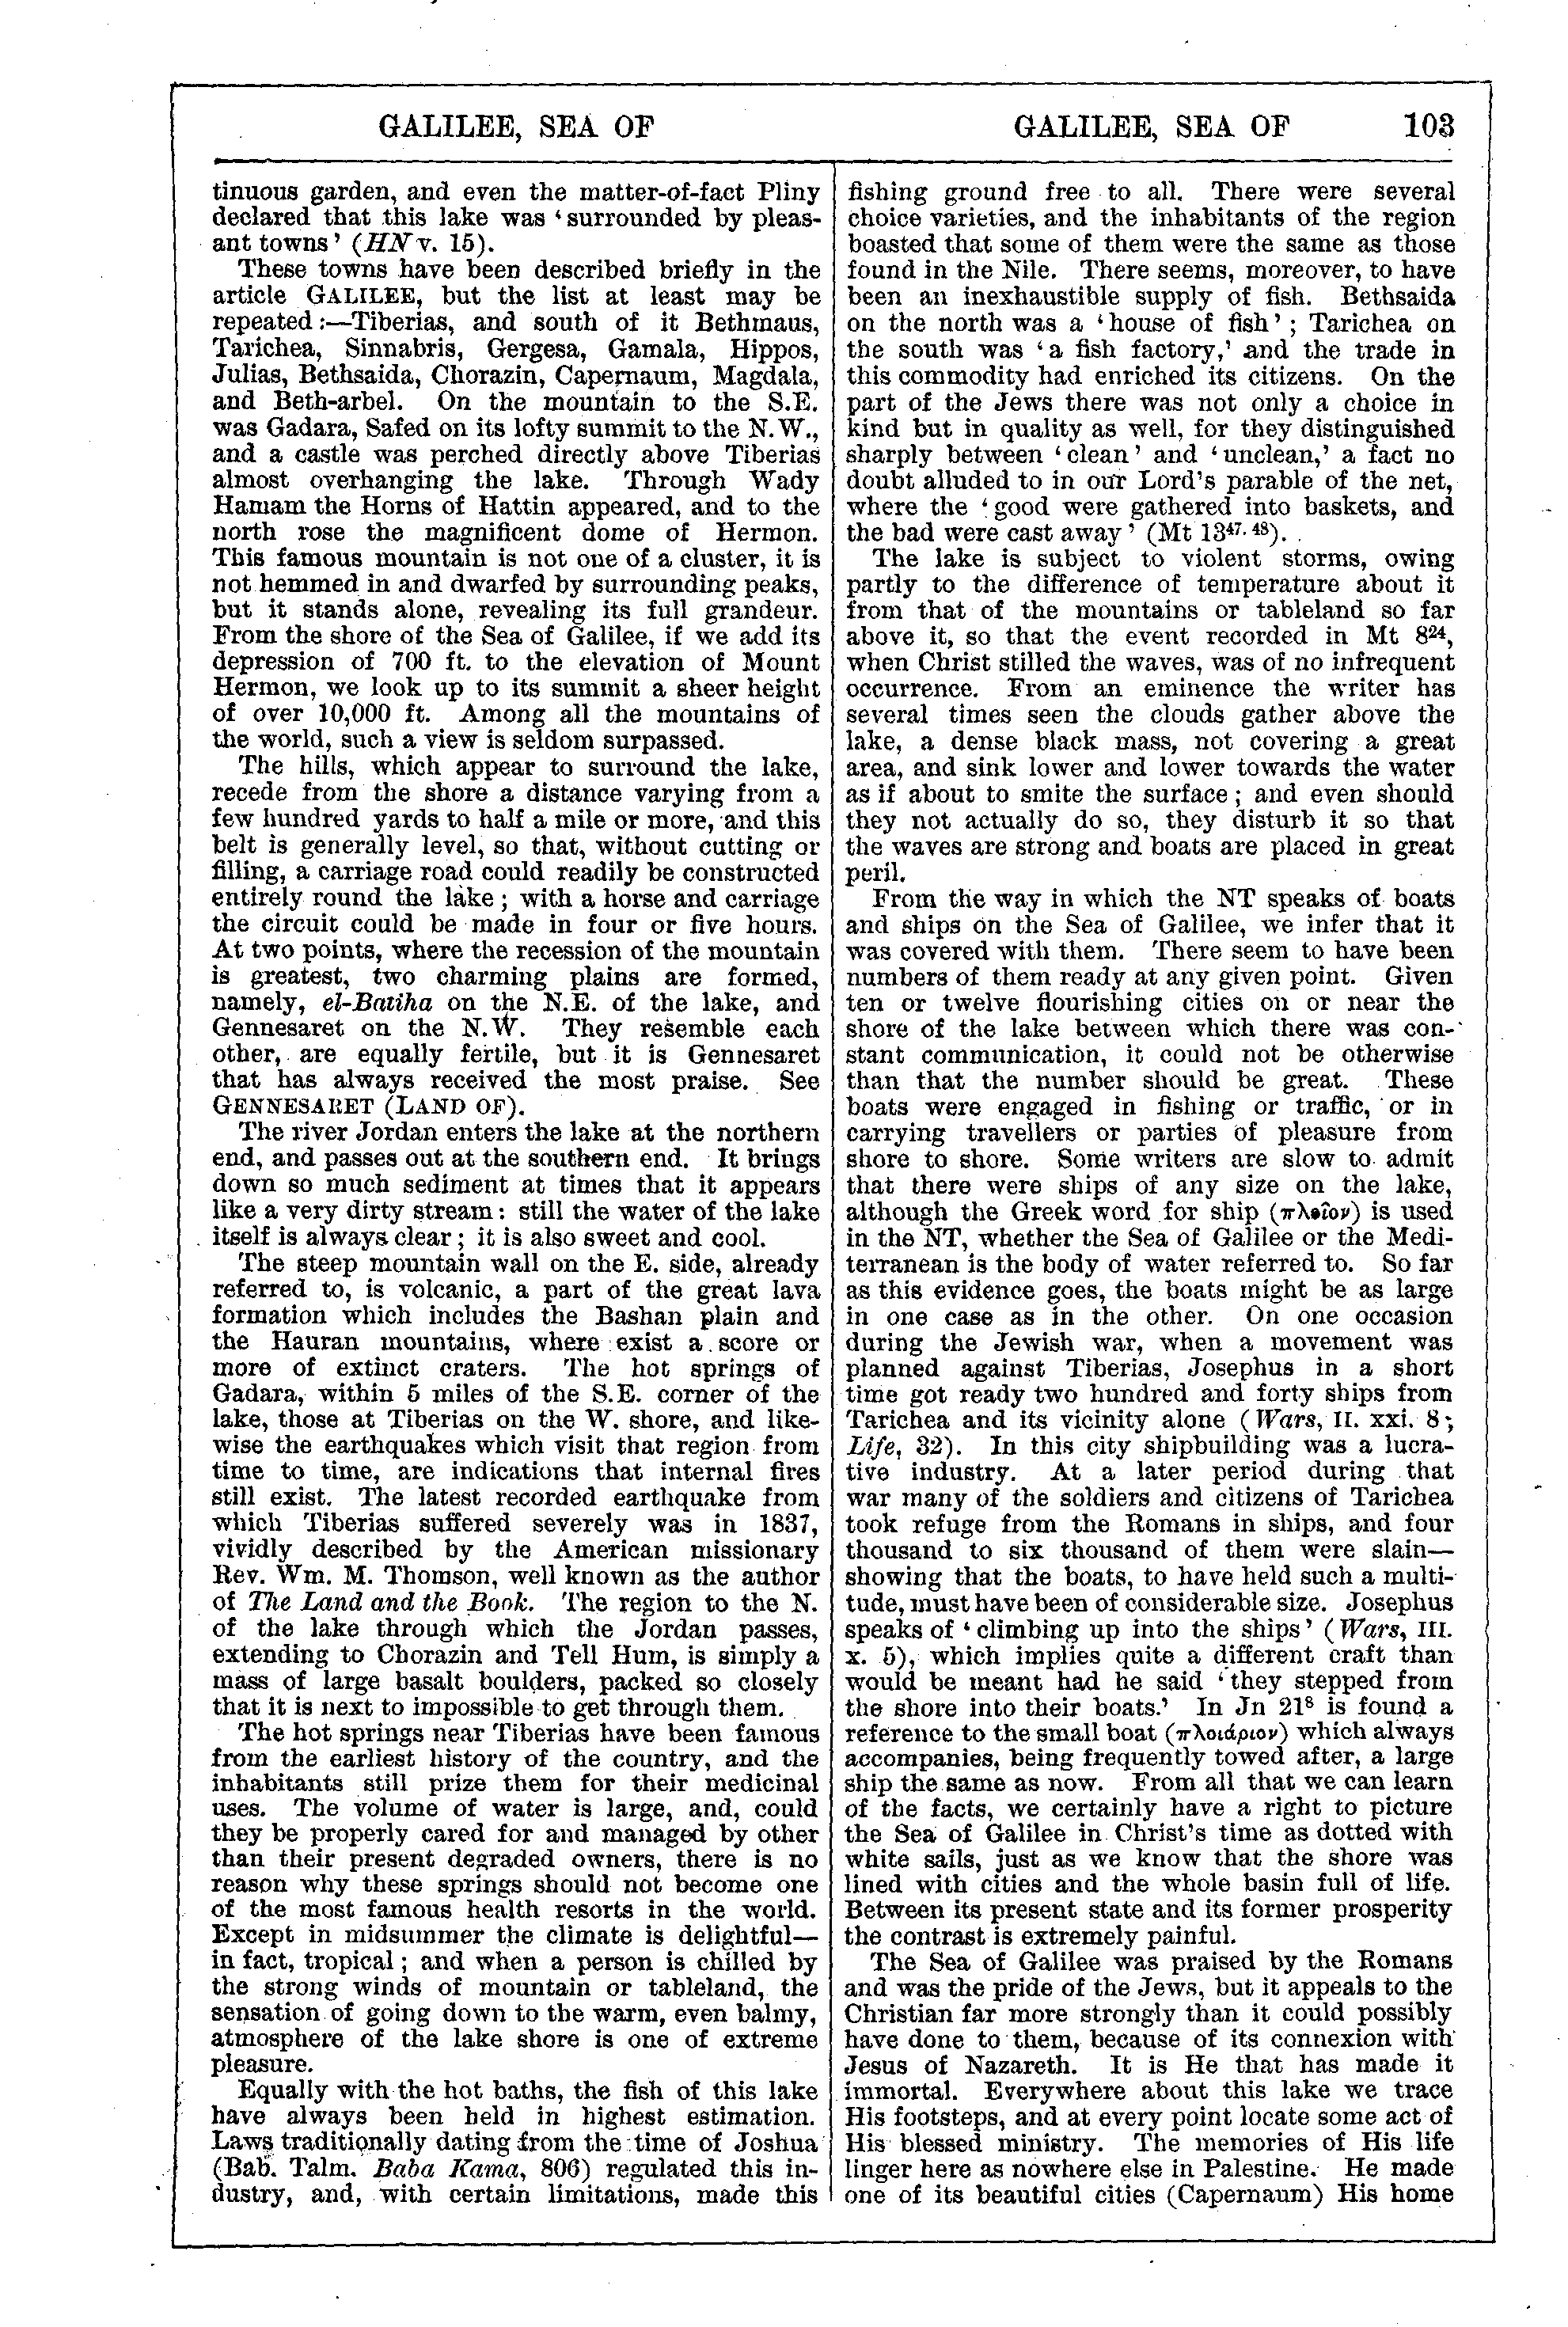 Image of page 103